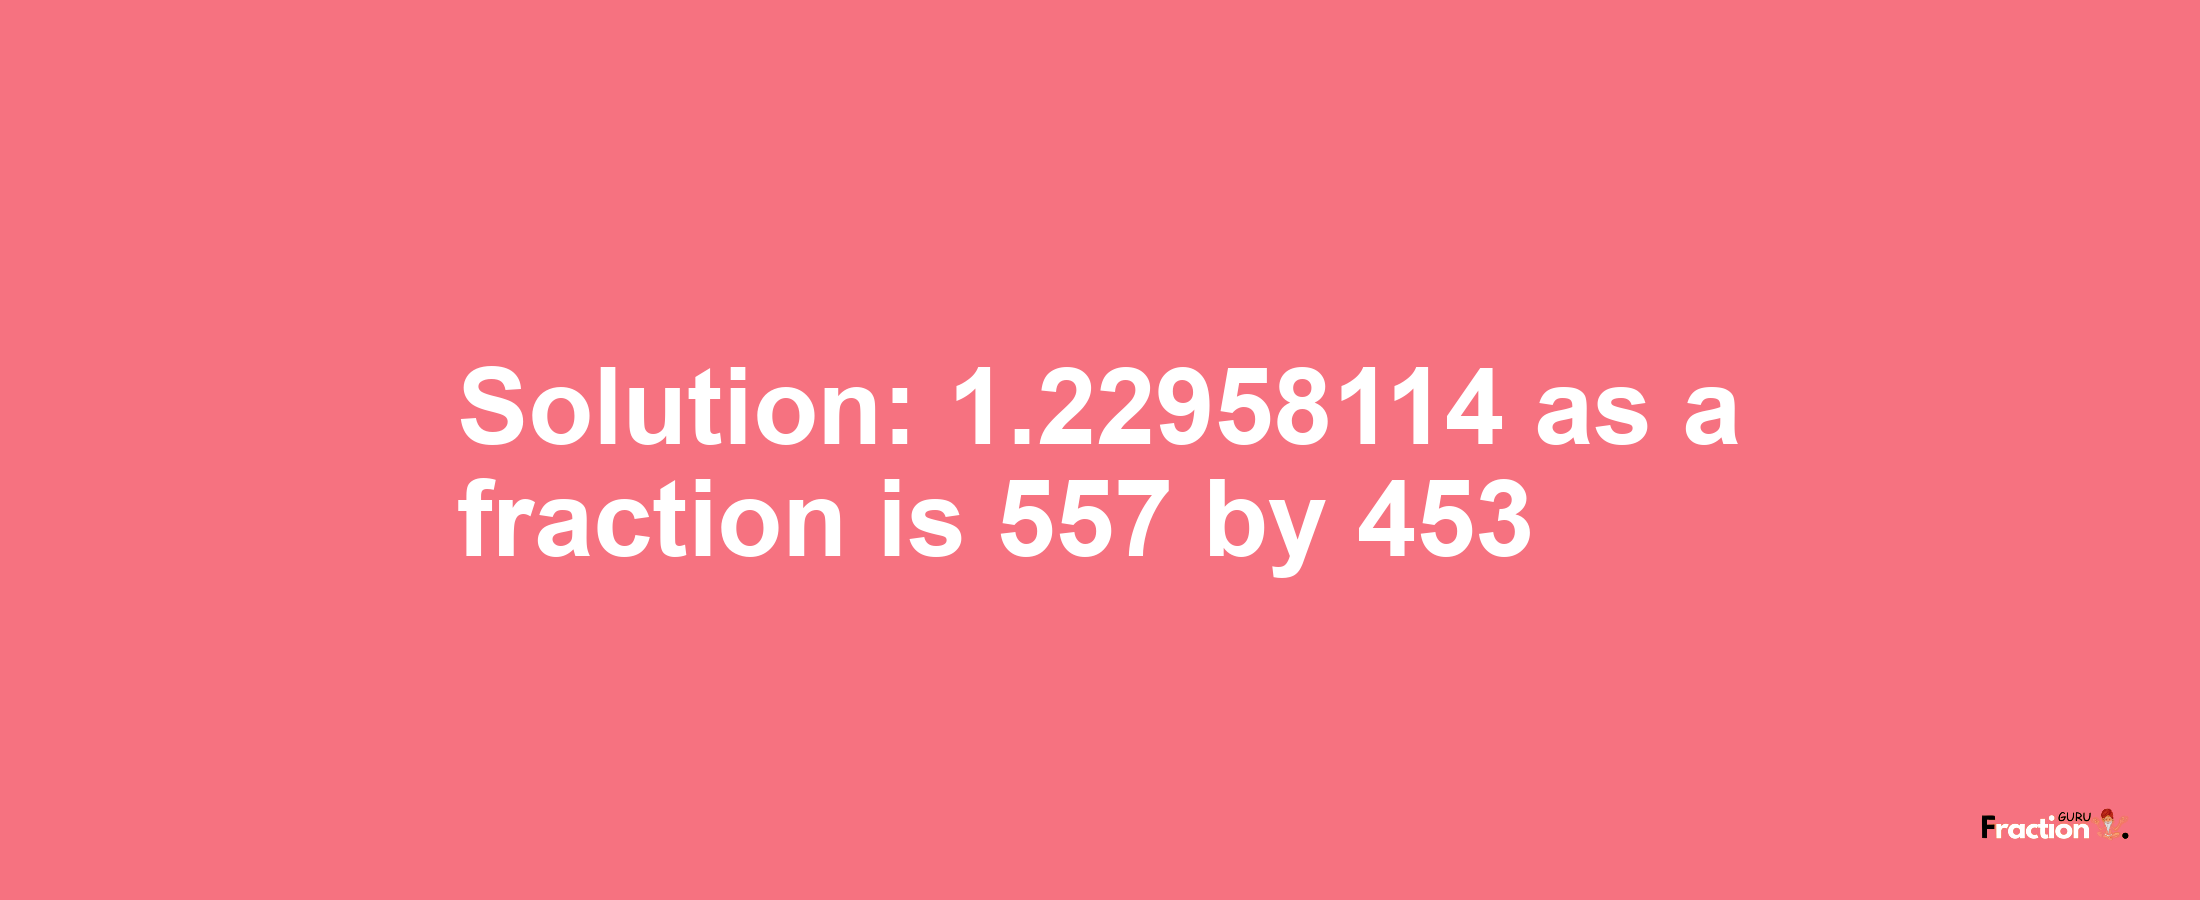 Solution:1.22958114 as a fraction is 557/453